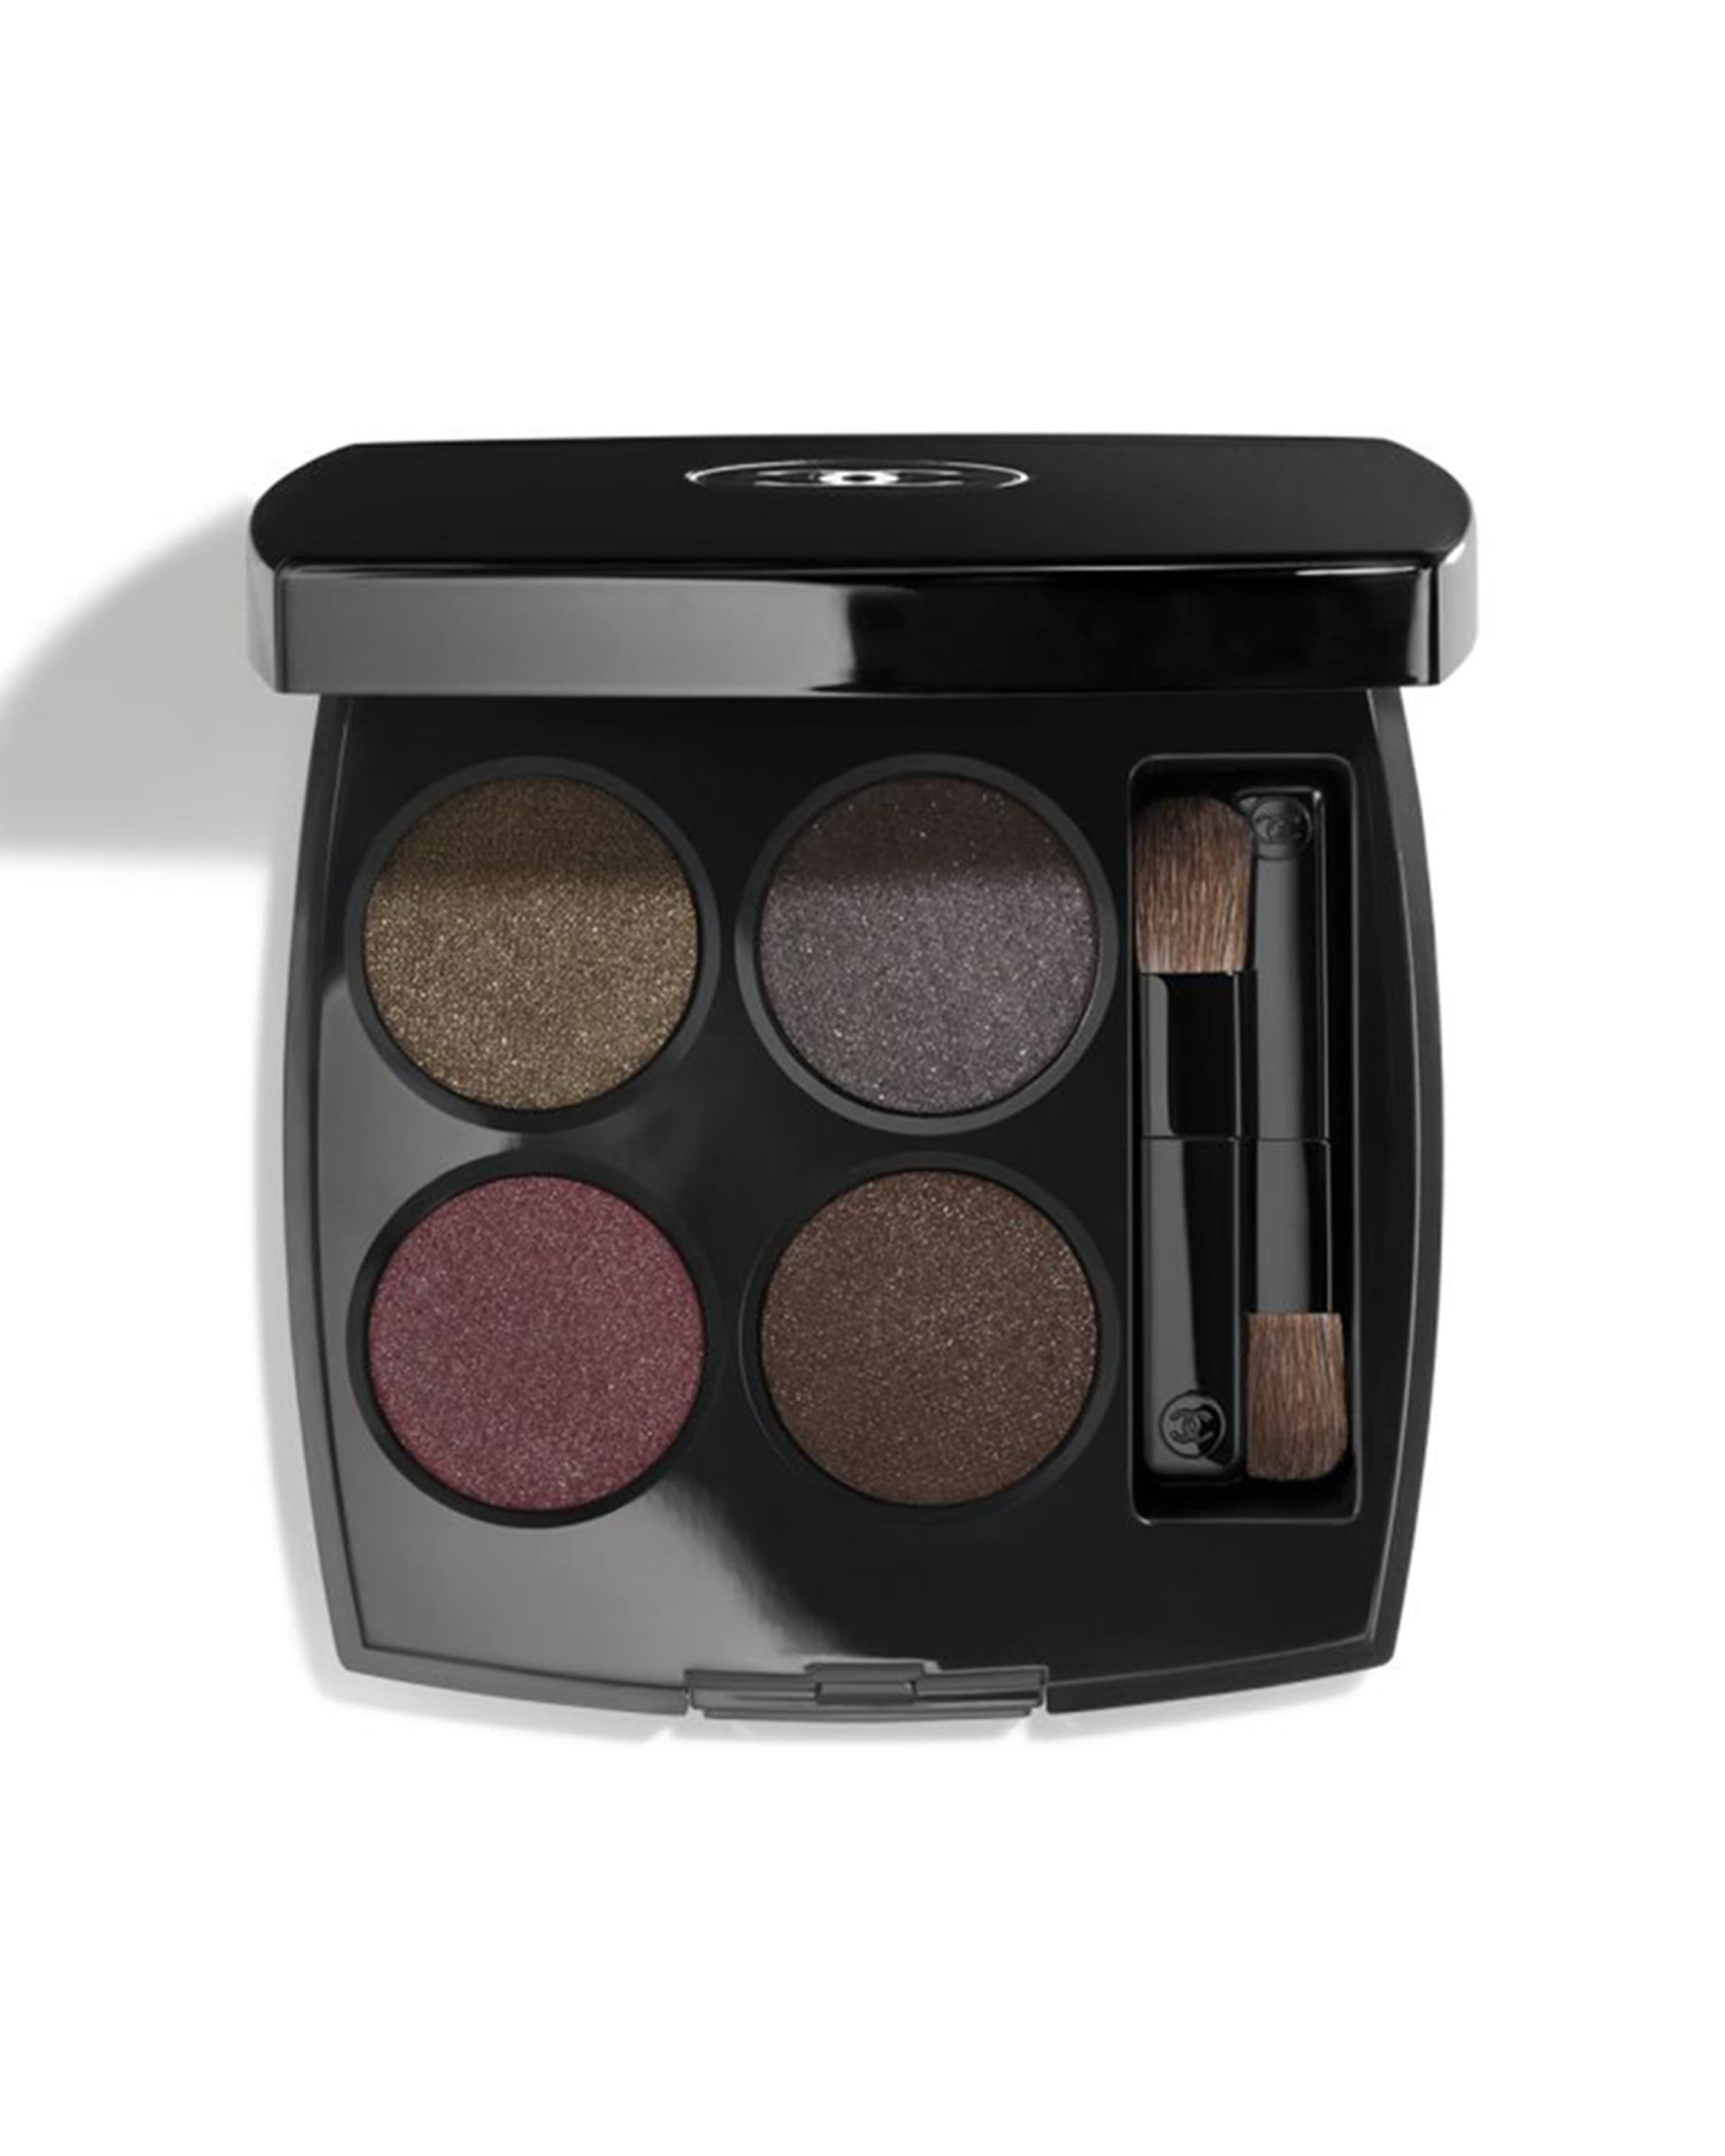 CHANEL LES 4 OMBRES Limited Edition Fall-Winter Multi-Effect